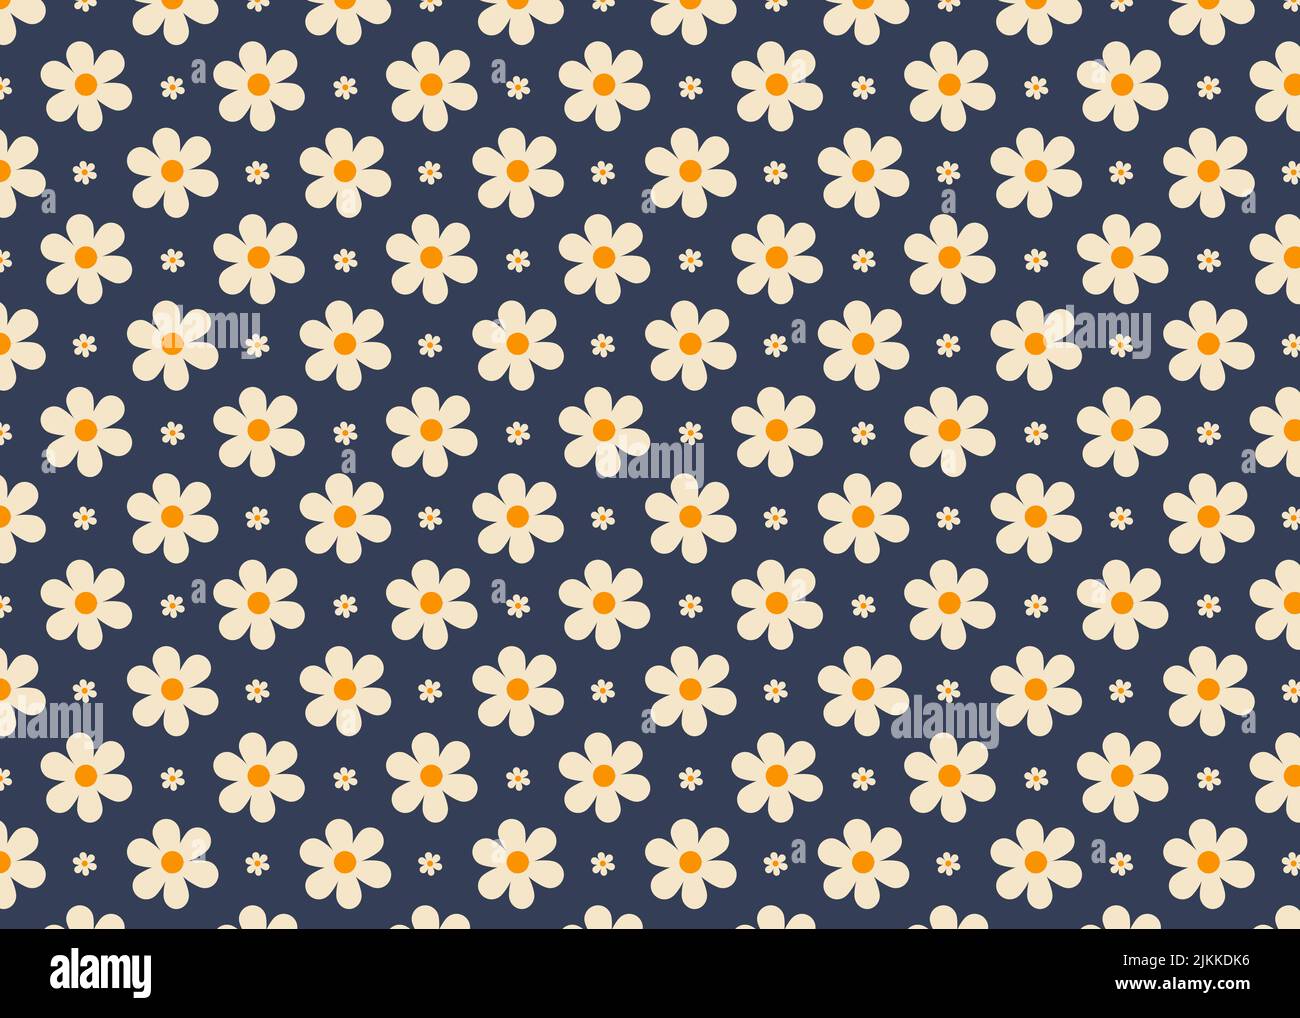 The seamless white flowers with yellow dot patterns on a blue background Stock Photo